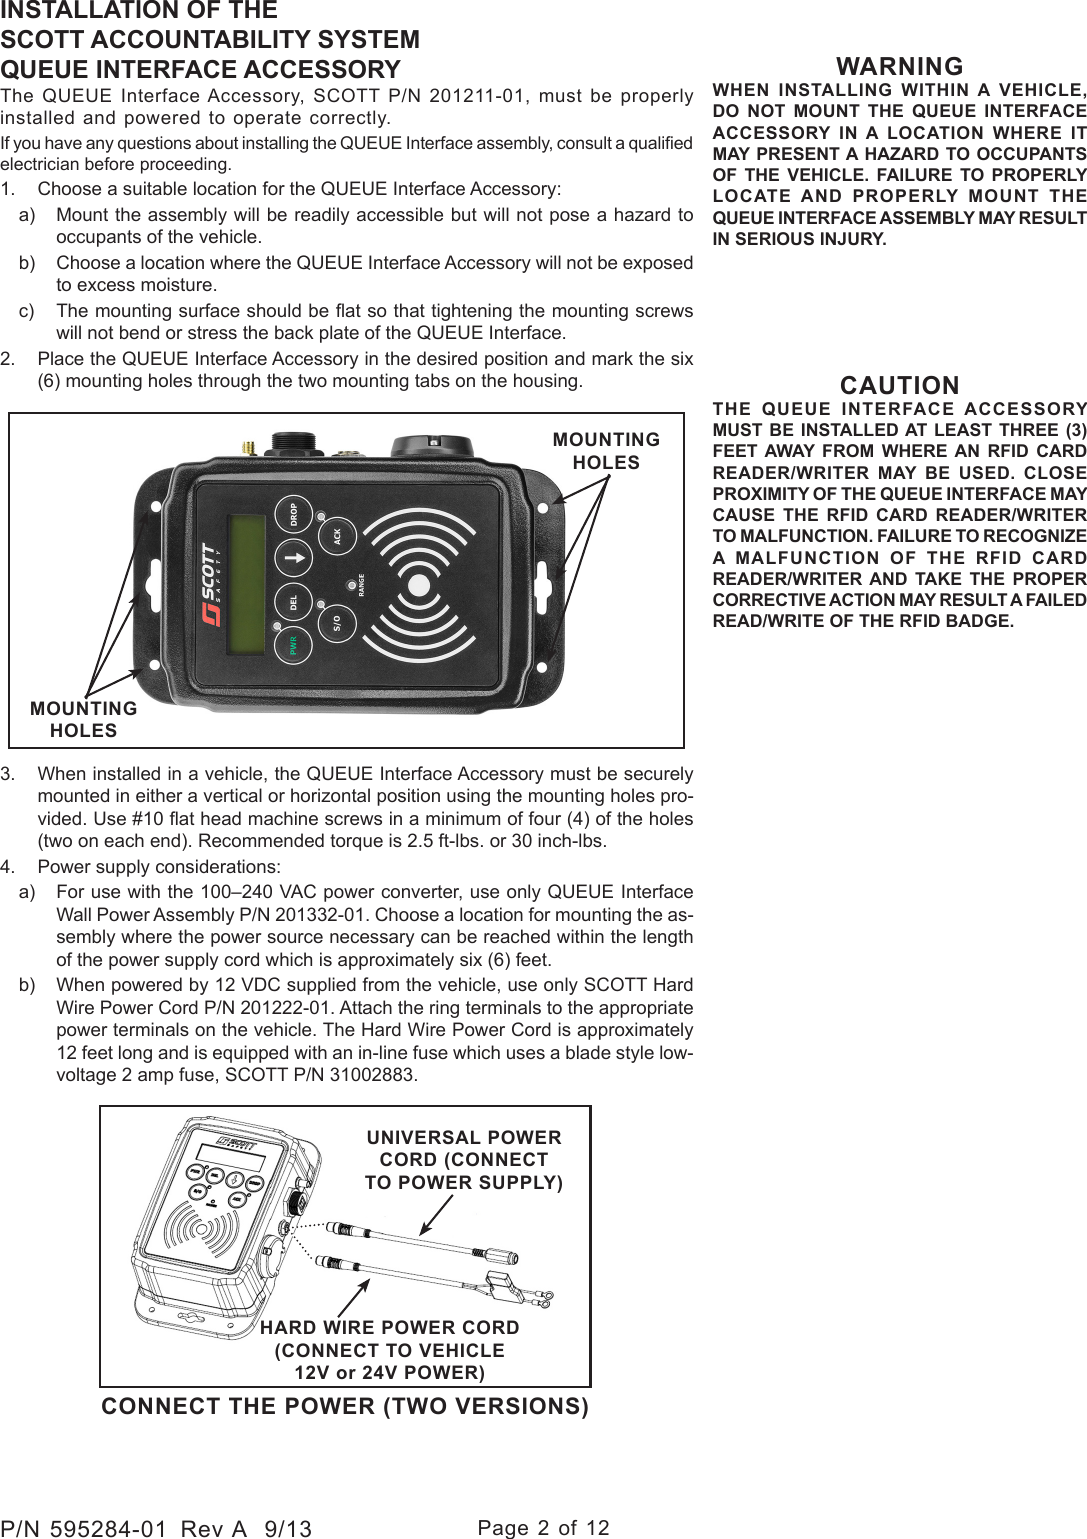 Page 2 of 12P/N 595284-01  Rev A  9/13INSTALLATION OF THE SCOTT ACCOUNTABILITY SYSTEMQUEUE INTERFACE ACCESSORYThe QUEUE Interface Accessory, SCOTT P/N 201211-01, must be properly installed and powered to operate correctly.If you have any questions about installing the QUEUE Interface assembly, consult a qualied electrician before proceeding.1.  Choose a suitable location for the QUEUE Interface Accessory:a)  Mount the assembly will be readily accessible but will not pose a hazard to occupants of the vehicle.b)  Choose a location where the QUEUE Interface Accessory will not be exposed to excess moisture.c)  The mounting surface should be at so that tightening the mounting screws will not bend or stress the back plate of the QUEUE Interface. 2.  Place the QUEUE Interface Accessory in the desired position and mark the six (6) mounting holes through the two mounting tabs on the housing. WARNINGWHEN INSTALLING WITHIN A VEHICLE, DO NOT MOUNT THE QUEUE INTERFACE ACCESSORY IN A LOCATION WHERE IT MAY PRESENT A HAZARD TO OCCUPANTS OF THE VEHICLE. FAILURE TO PROPERLY LOCATE AND PROPERLY MOUNT THE QUEUE INTERFACE ASSEMBLY MAY RESULT IN SERIOUS INJURY.CONNECT THE POWER (TWO VERSIONS)UNIVERSAL POWER CORD (CONNECT TO POWER SUPPLY)HARD WIRE POWER CORD (CONNECT TO VEHICLE 12V or 24V POWER)3.  When installed in a vehicle, the QUEUE Interface Accessory must be securely mounted in either a vertical or horizontal position using the mounting holes pro-vided. Use #10 at head machine screws in a minimum of four (4) of the holes (two on each end). Recommended torque is 2.5 ft-lbs. or 30 inch-lbs.4.  Power supply considerations:a)  For use with the 100–240 VAC power converter, use only QUEUE Interface Wall Power Assembly P/N 201332-01. Choose a location for mounting the as-sembly where the power source necessary can be reached within the length of the power supply cord which is approximately six (6) feet. b)  When powered by 12 VDC supplied from the vehicle, use only SCOTT Hard Wire Power Cord P/N 201222-01. Attach the ring terminals to the appropriate power terminals on the vehicle. The Hard Wire Power Cord is approximately 12 feet long and is equipped with an in-line fuse which uses a blade style low-voltage 2 amp fuse, SCOTT P/N 31002883.MOUNTING HOLESMOUNTING HOLESCAUTIONTHE QUEUE INTERFACE ACCESSORY MUST BE INSTALLED AT LEAST THREE (3) FEET AWAY FROM WHERE AN RFID CARD READER/WRITER MAY BE USED. CLOSE PROXIMITY OF THE QUEUE INTERFACE MAY CAUSE THE RFID CARD READER/WRITER TO MALFUNCTION. FAILURE TO RECOGNIZE A MALFUNCTION OF THE RFID CARD READER/WRITER AND TAKE THE PROPER CORRECTIVE ACTION MAY RESULT A FAILED READ/WRITE OF THE RFID BADGE. 